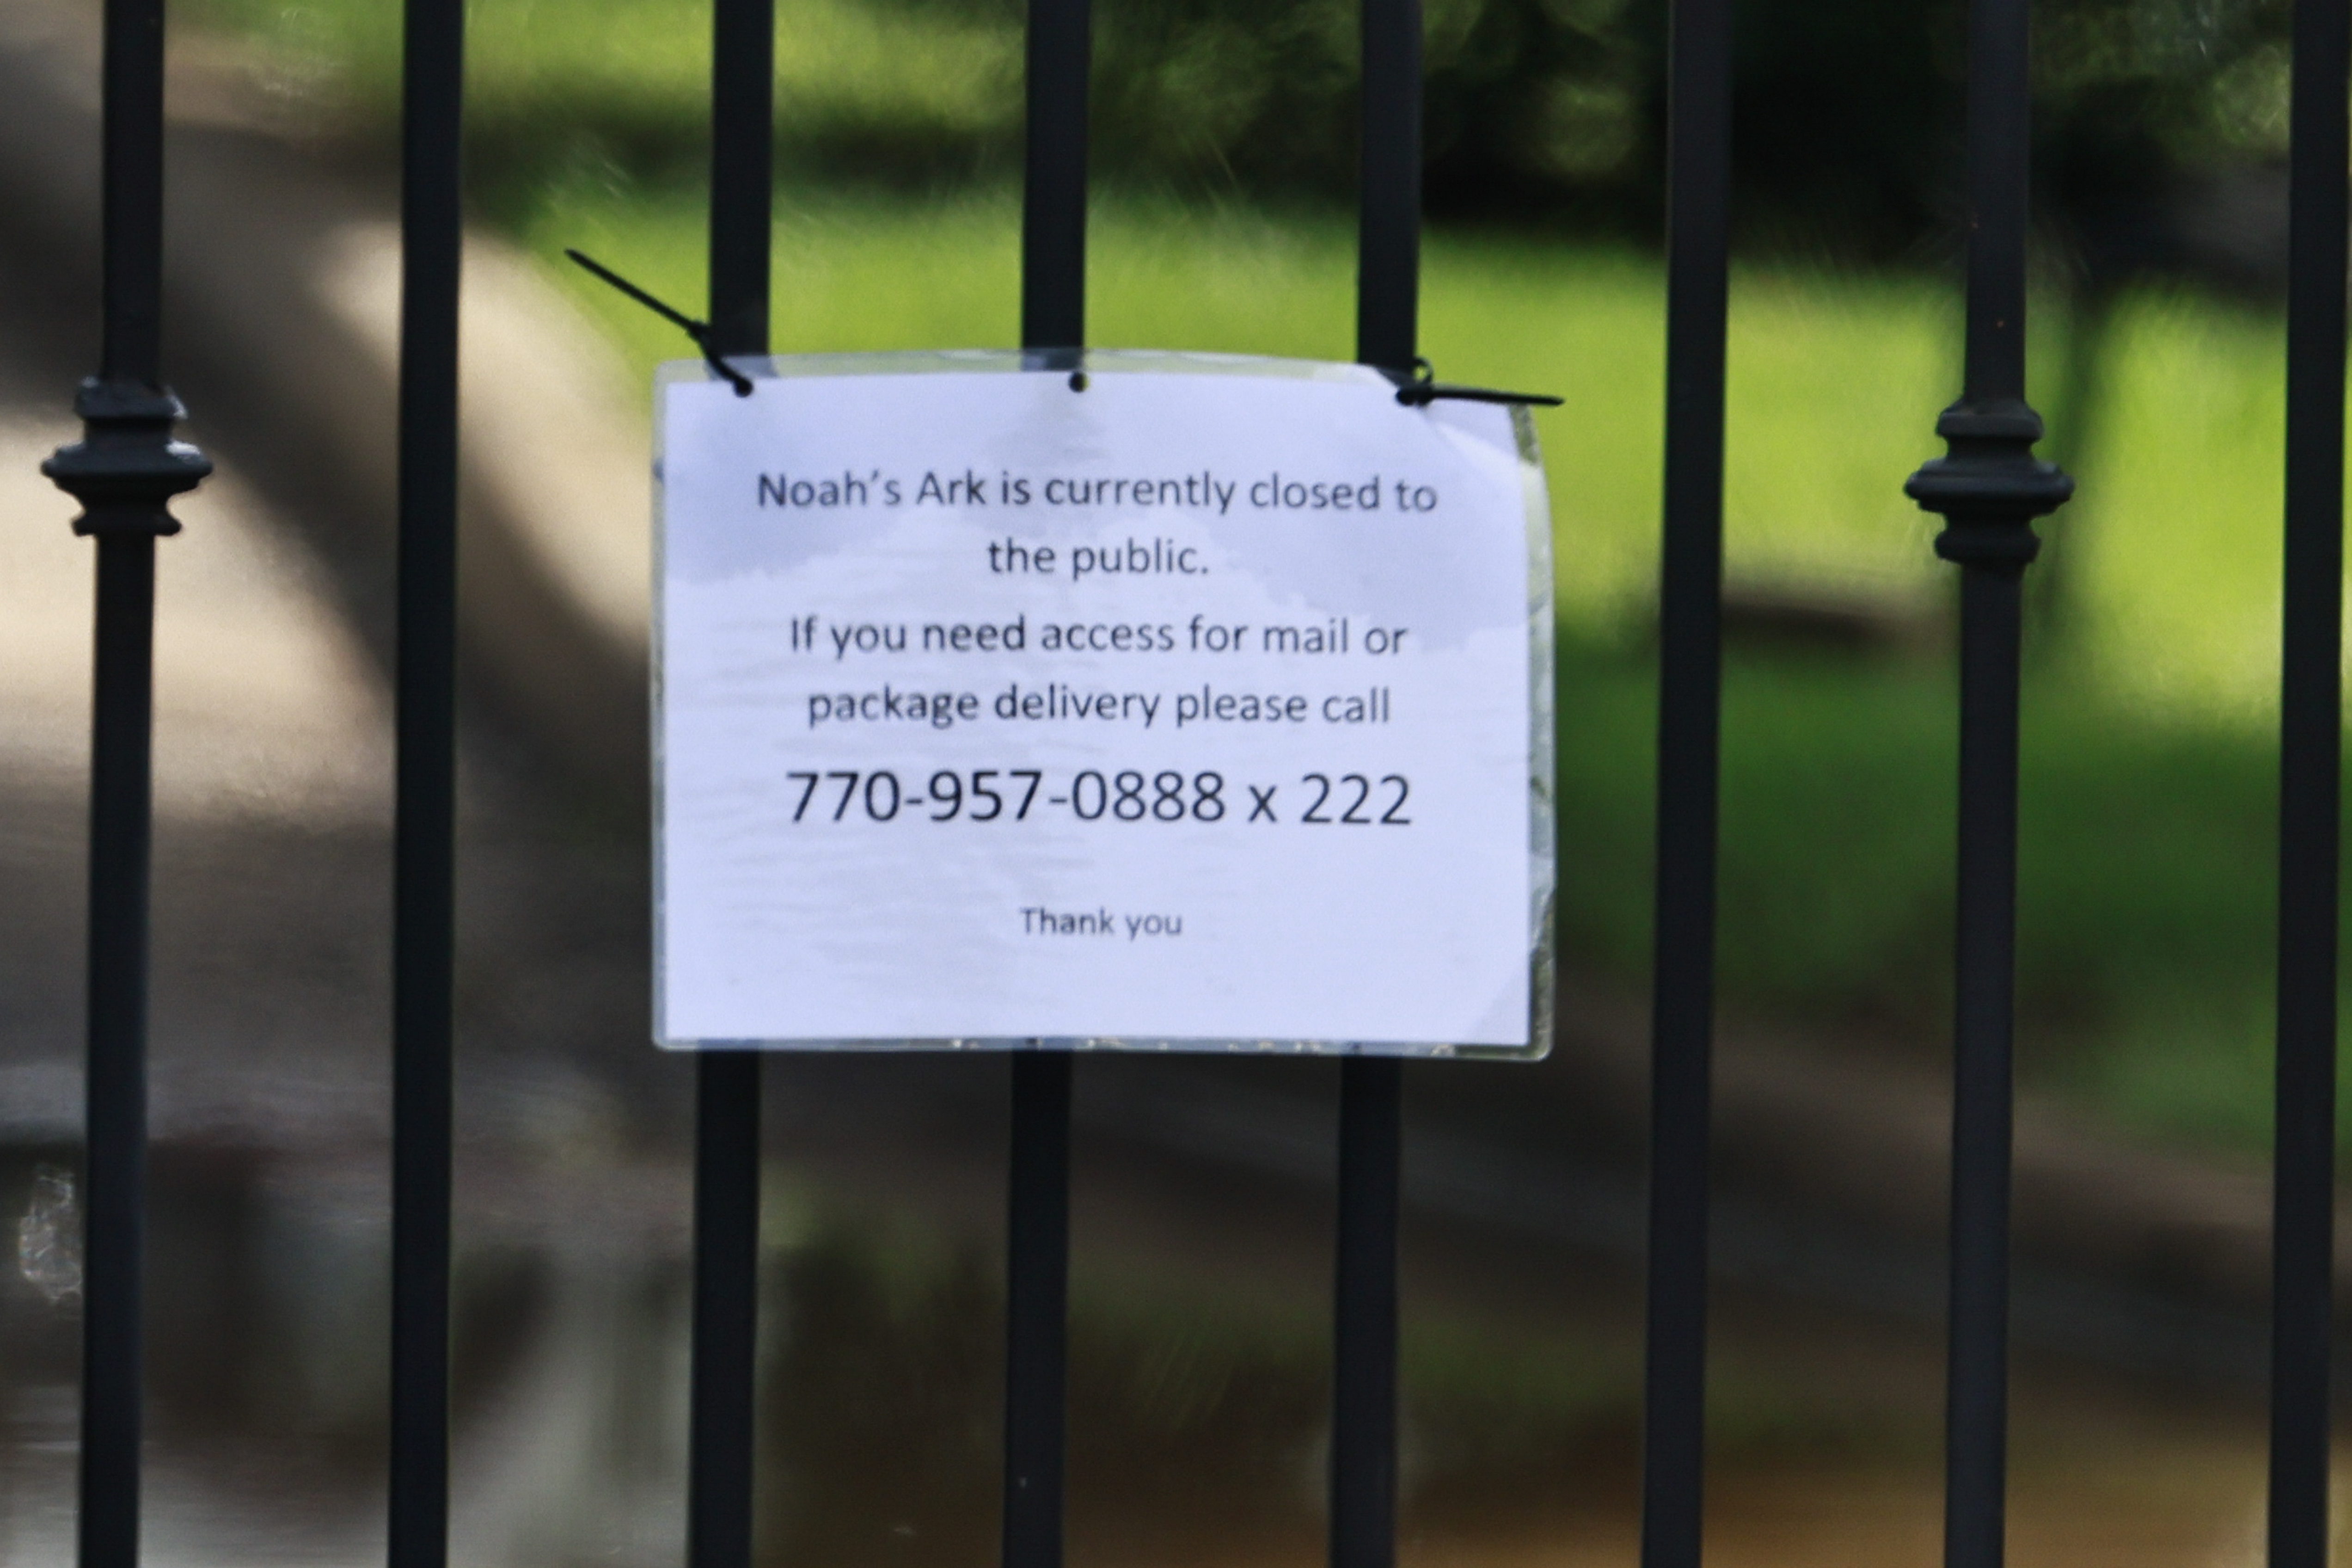 On Monday, August 22, 2022, the gates of Noah's Ark Animal Sanctuary in Locust Gardens will be closed to the public.  (Natrice Miller/natrice.miller@ajc.com)